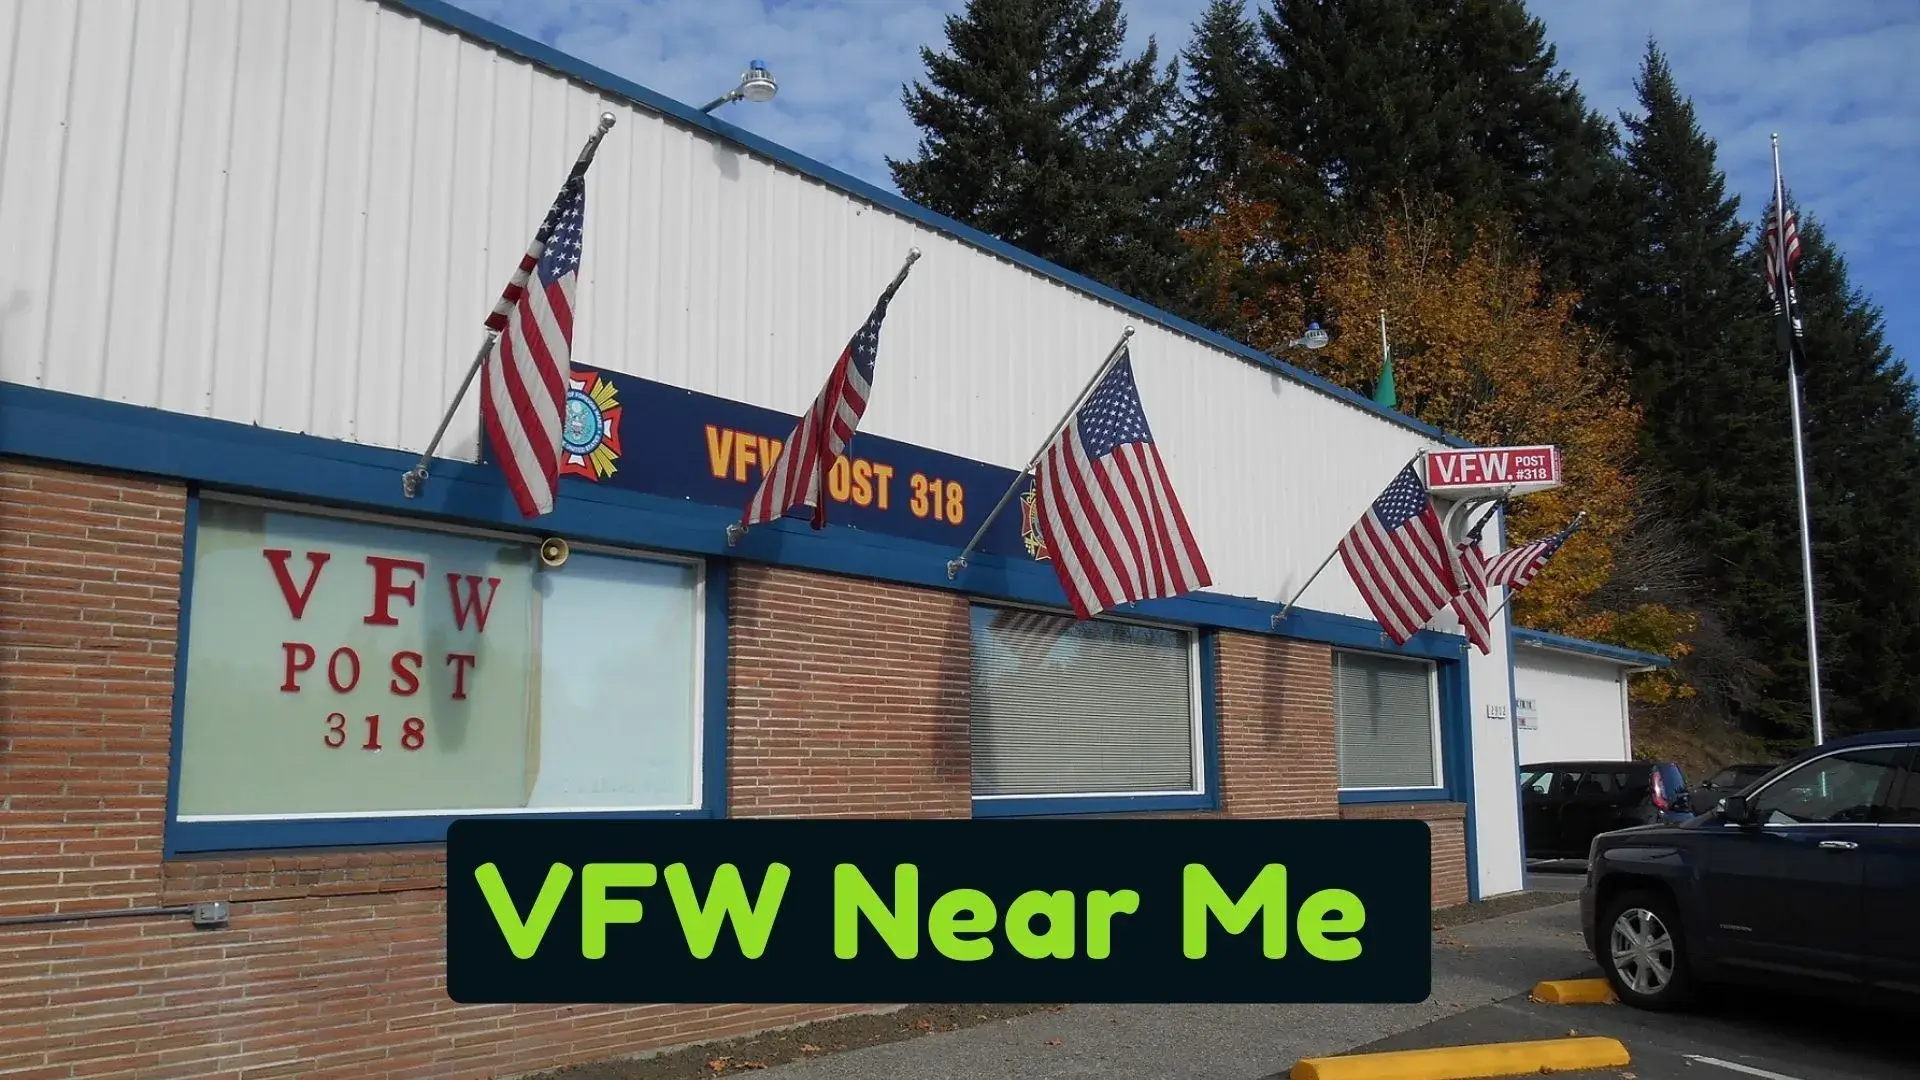 Are You Loking For Nearest VFW Posts And Halls | Then Read This Ultimate Guide To Find VFW Near Me Locations & Hours In Your Area.